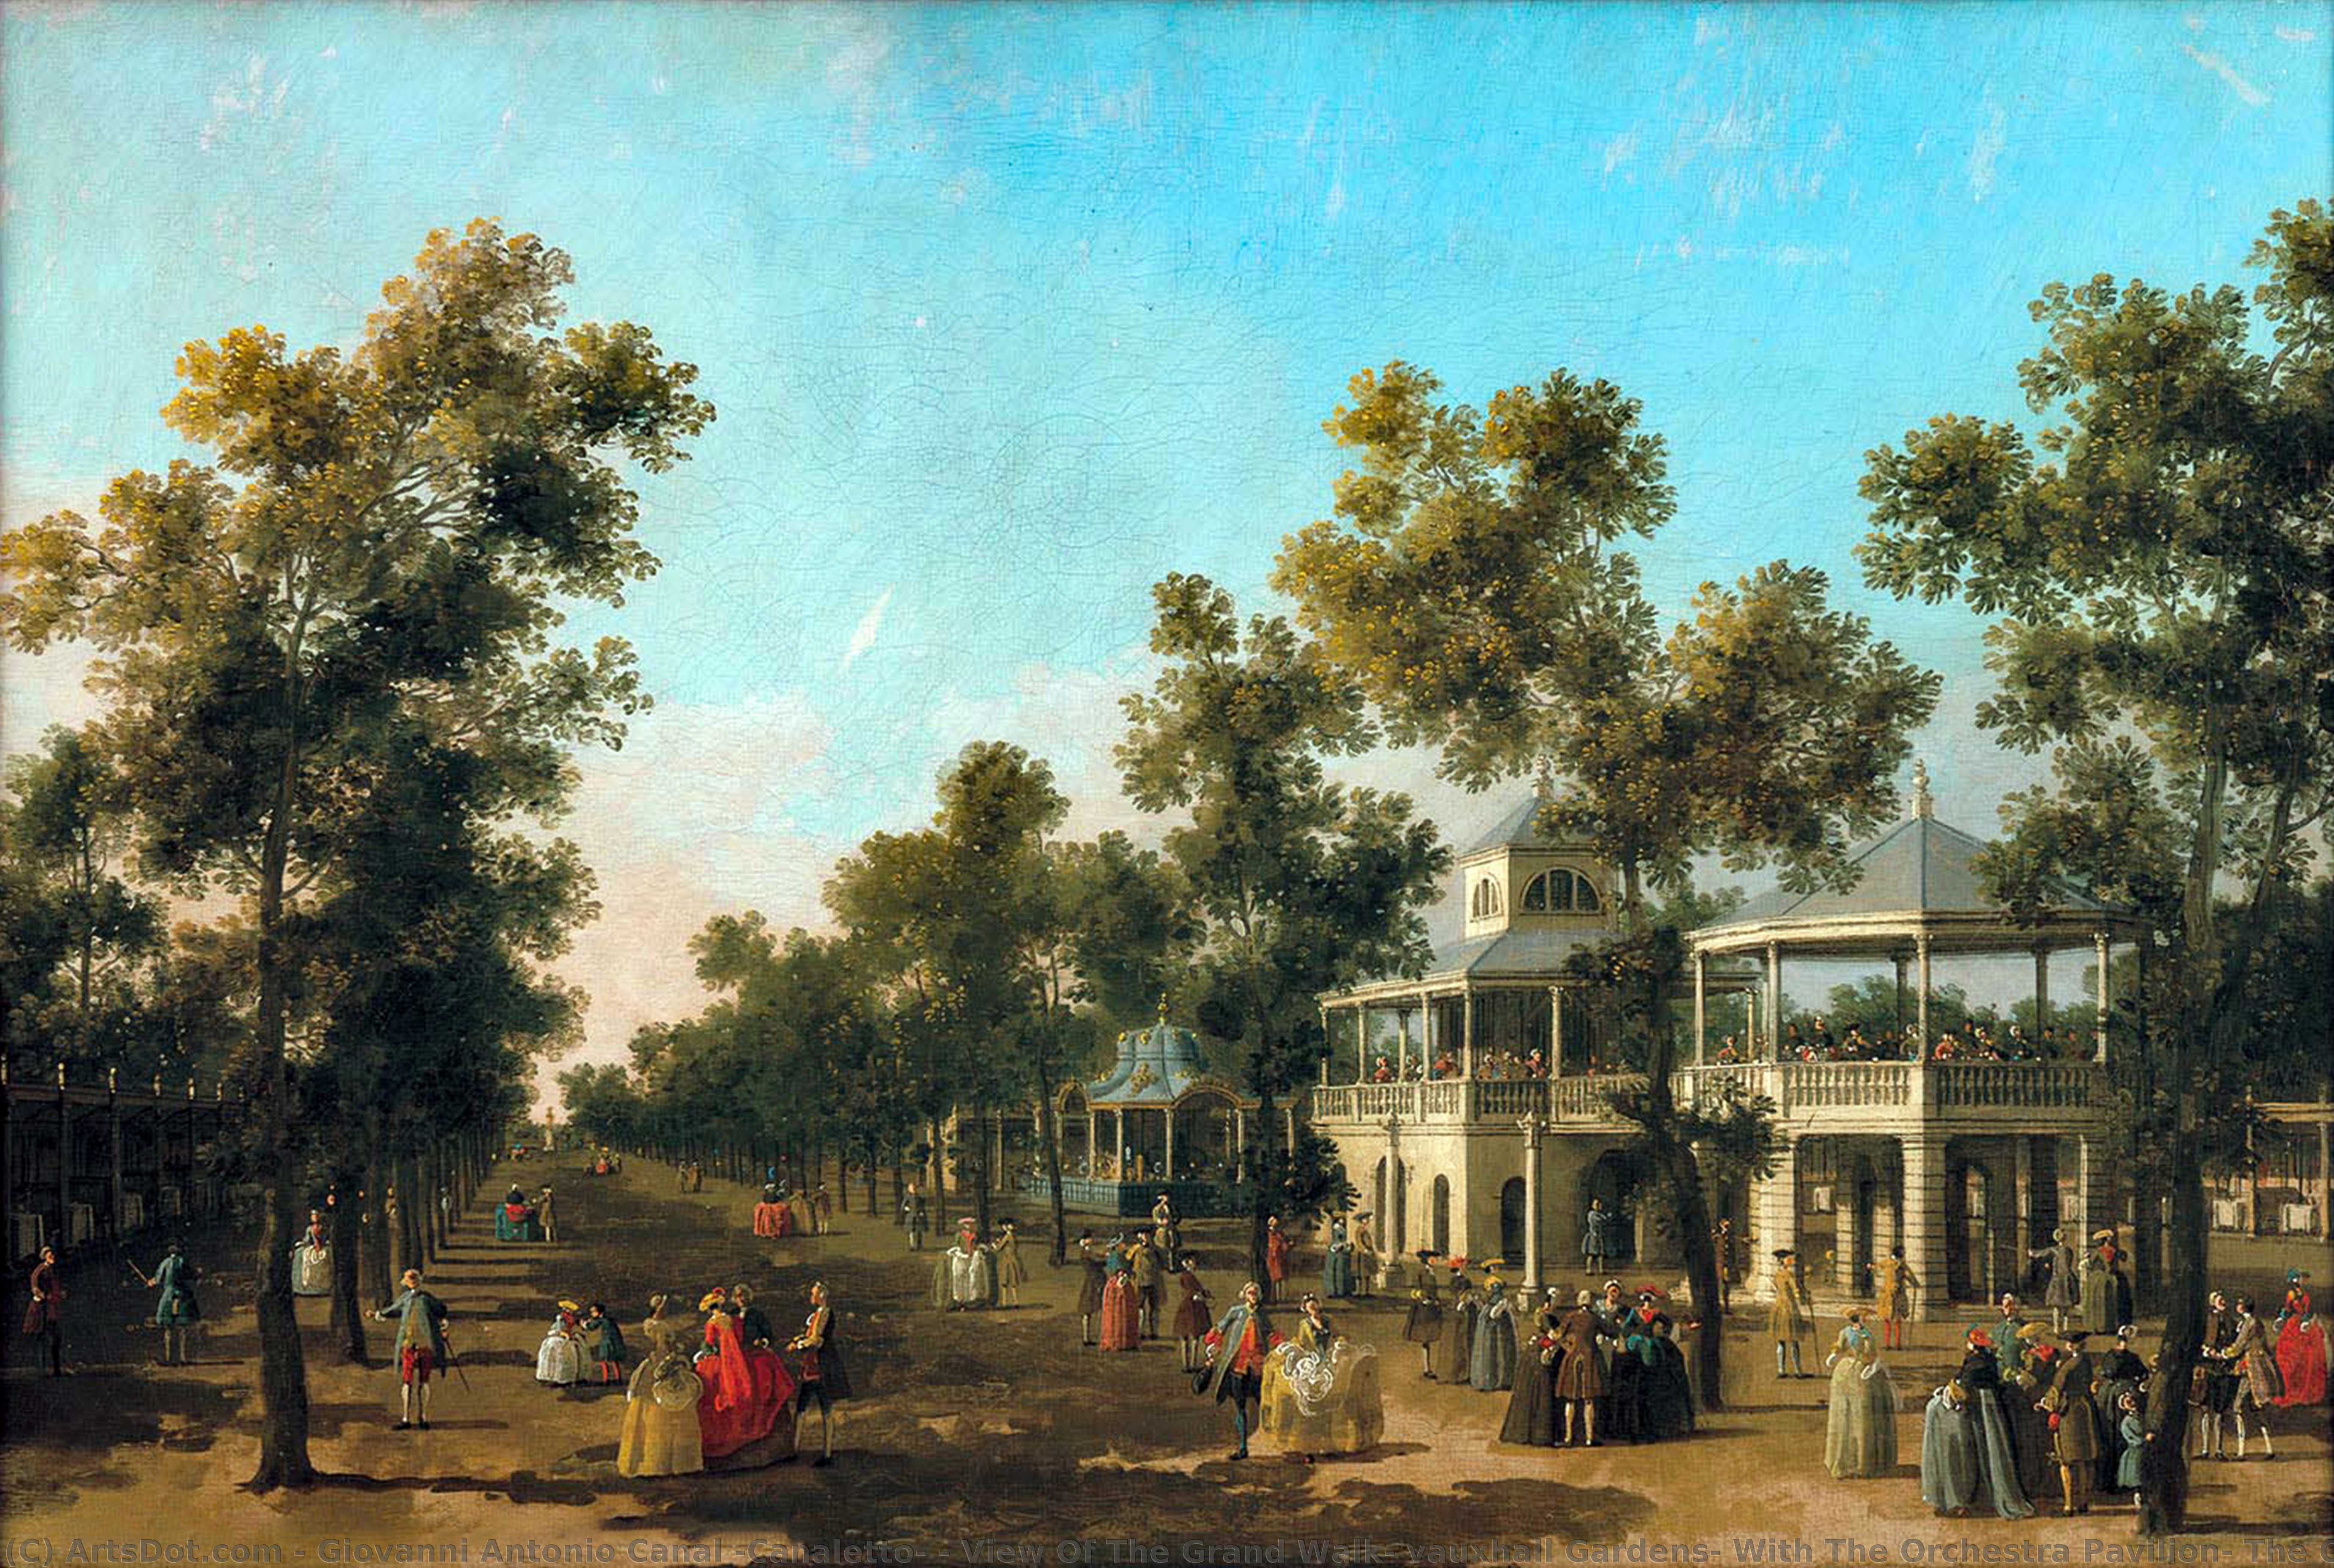 WikiOO.org - Güzel Sanatlar Ansiklopedisi - Resim, Resimler Giovanni Antonio Canal (Canaletto) - View Of The Grand Walk, vauxhall Gardens, With The Orchestra Pavilion, The Organ House, The Turkish Dining Tent And The Statue Of Aurora